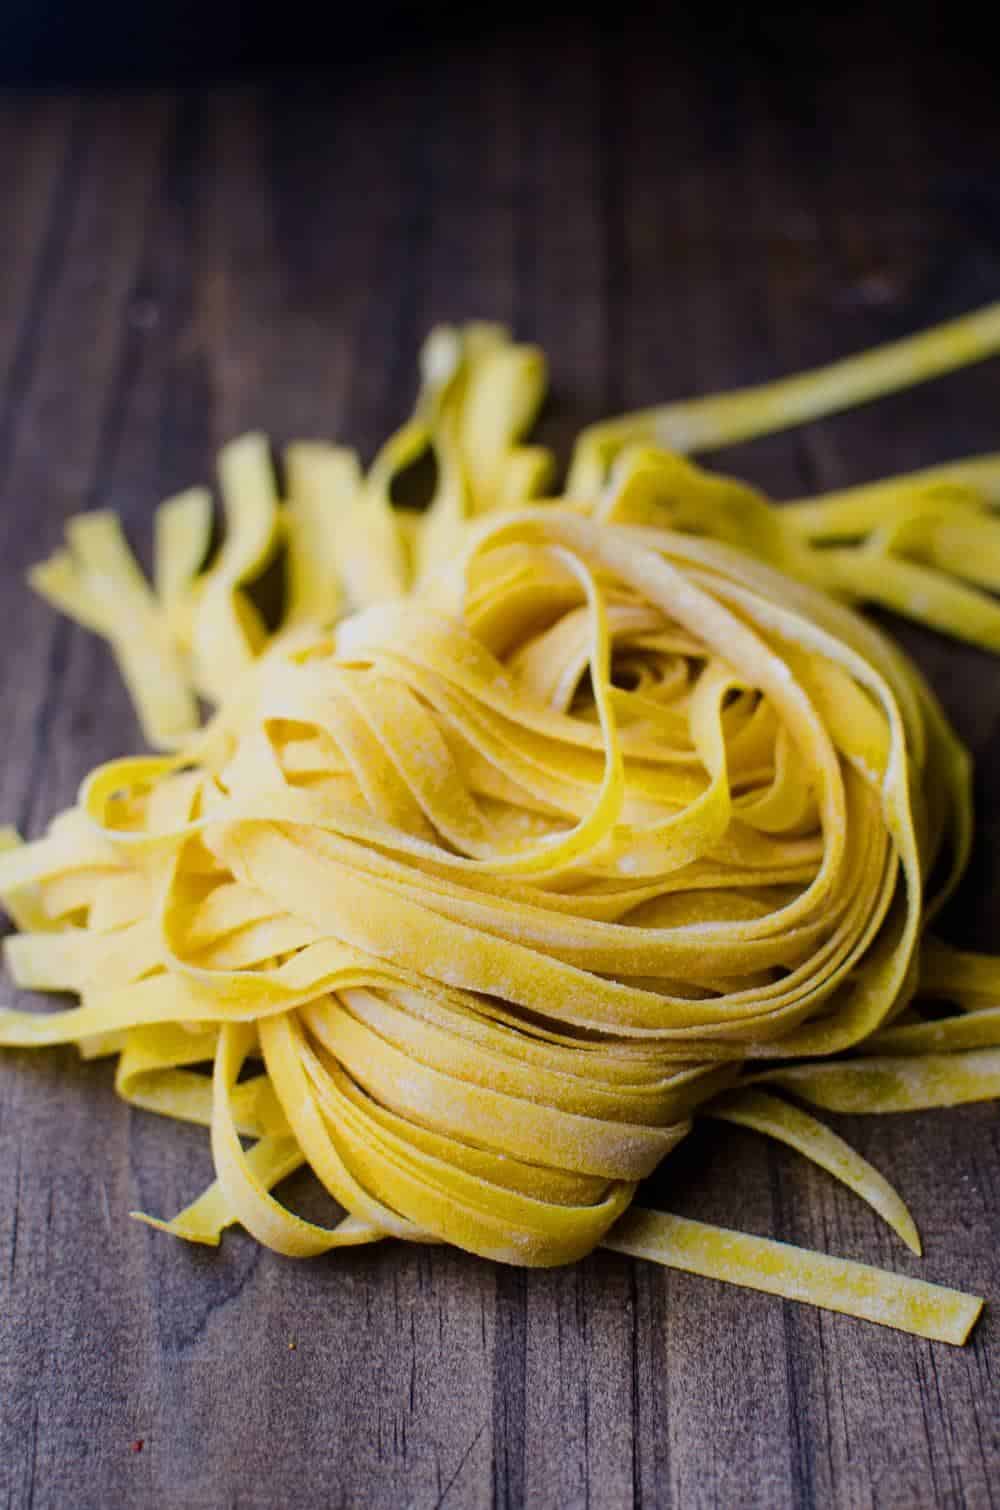 Homemade Turmeric Pasta - Bright yellow, smokey turmeric infused into homemade pasta dough. Fun to make and gives your pasta a delicious smoky flavor with a pleasant, slight bitterness.